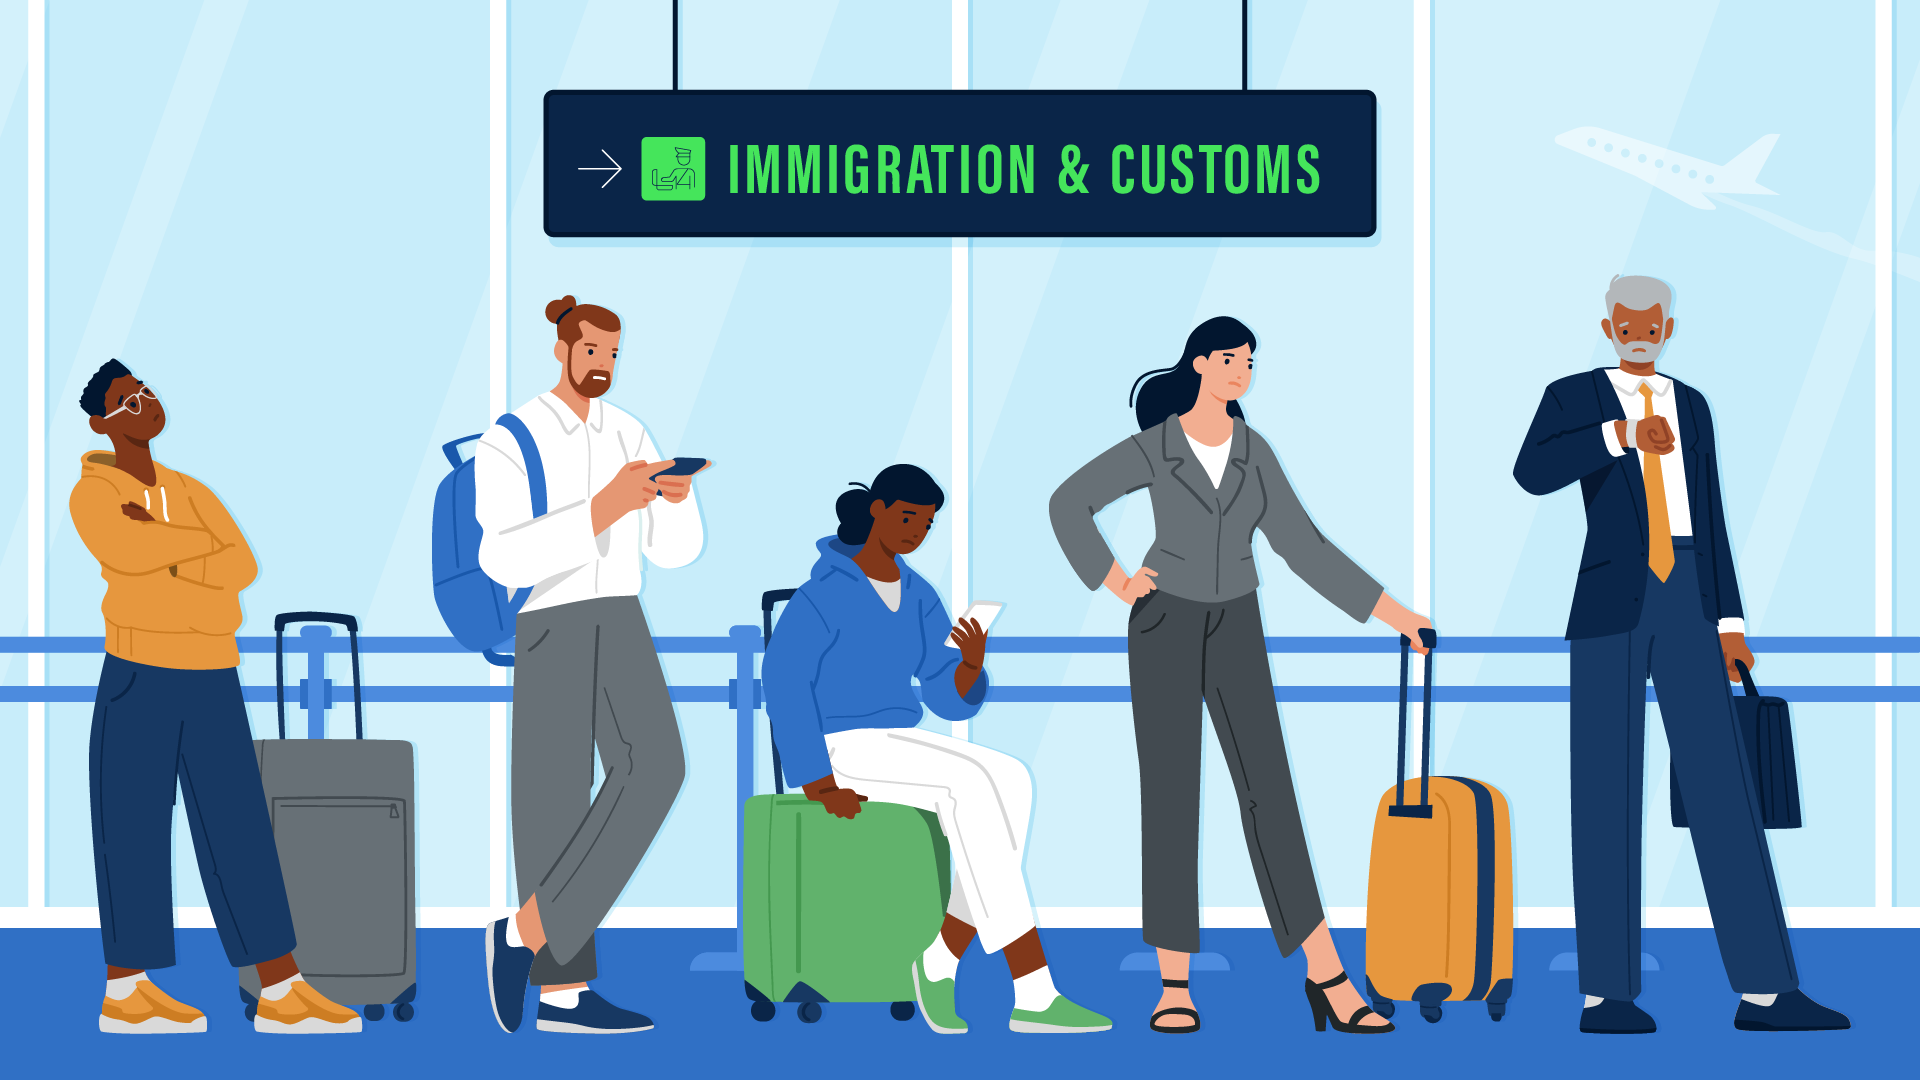 Immigrations and Customs Wait Time